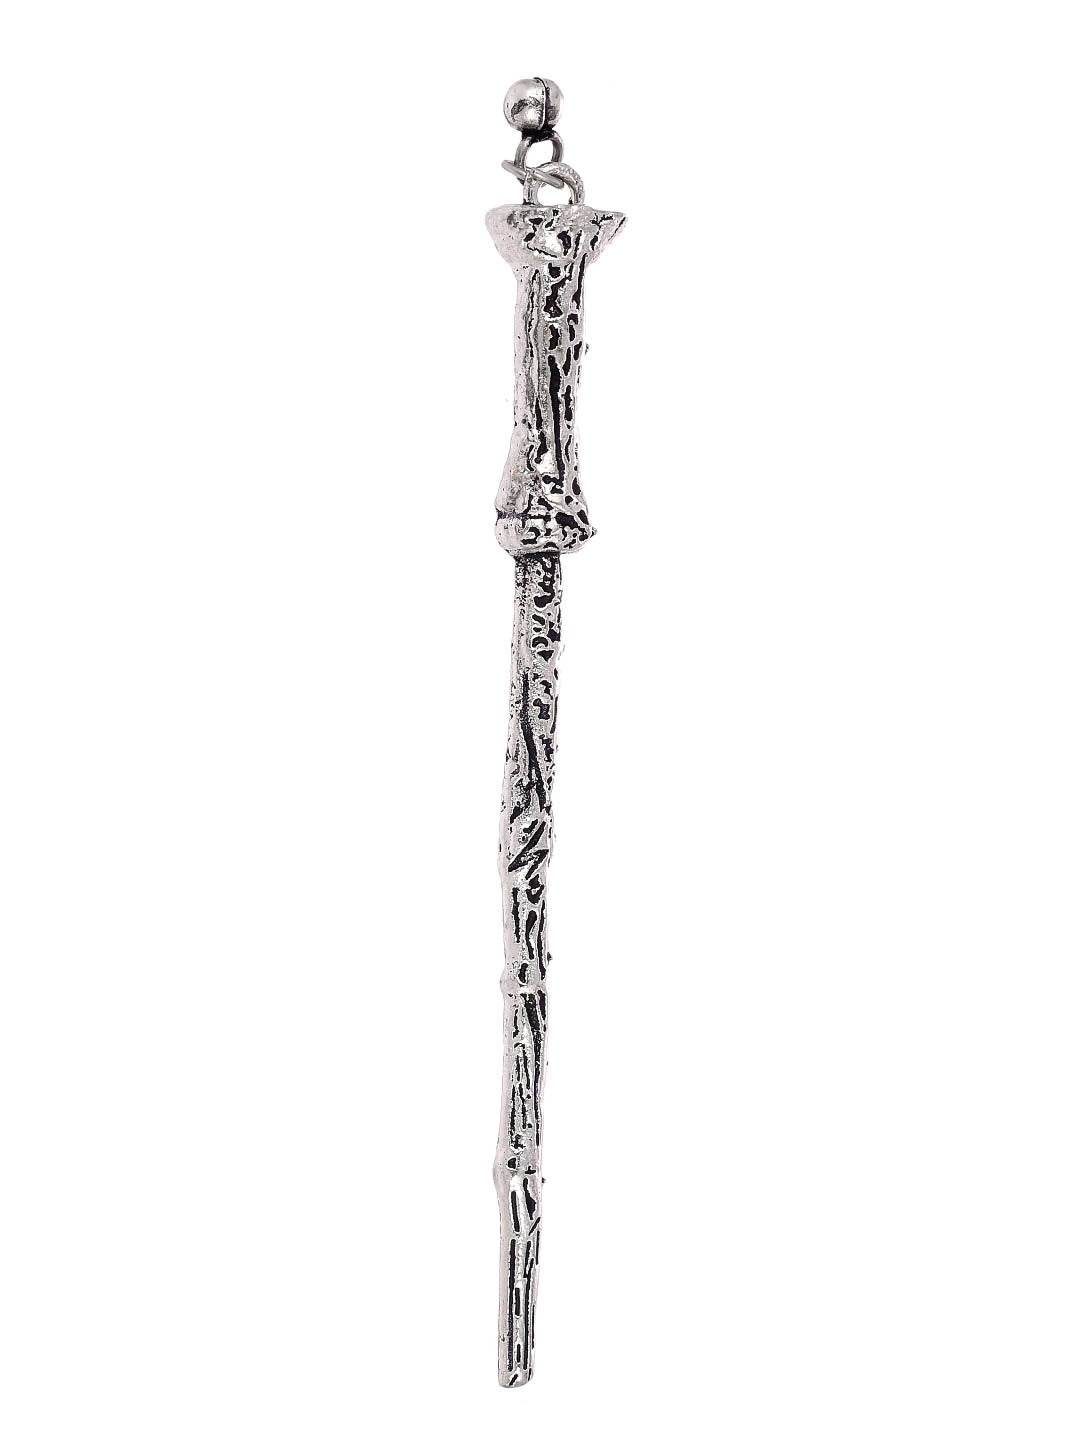 Silver Toned Embellished Hairstick Accessory